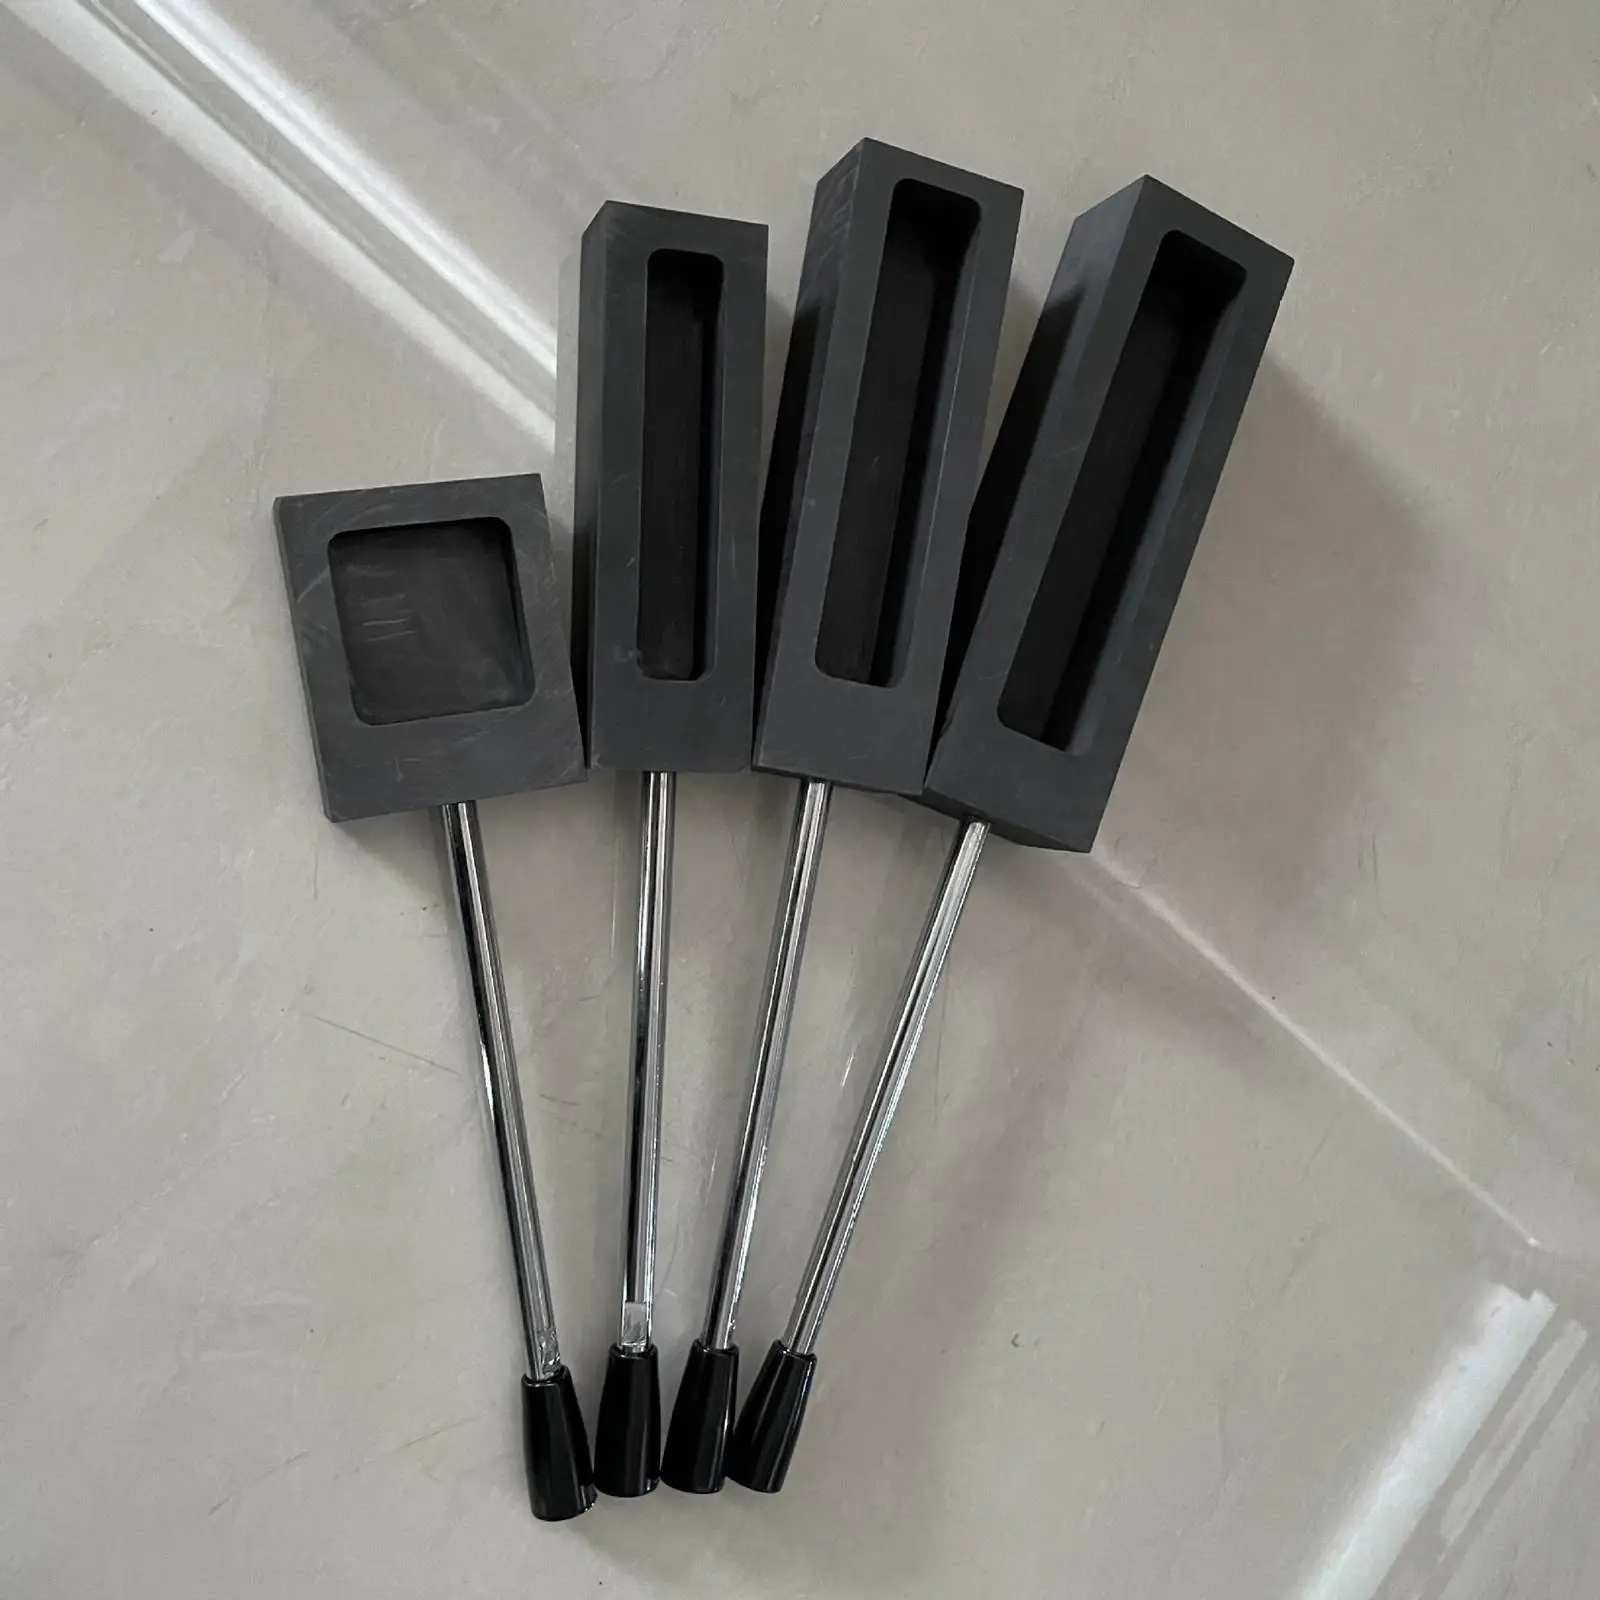 Rectangle Graphite Ingot Castings Refining Bars Casting with Handle Graphite Tank for Gold Silver Copper Precious Metal Alloy